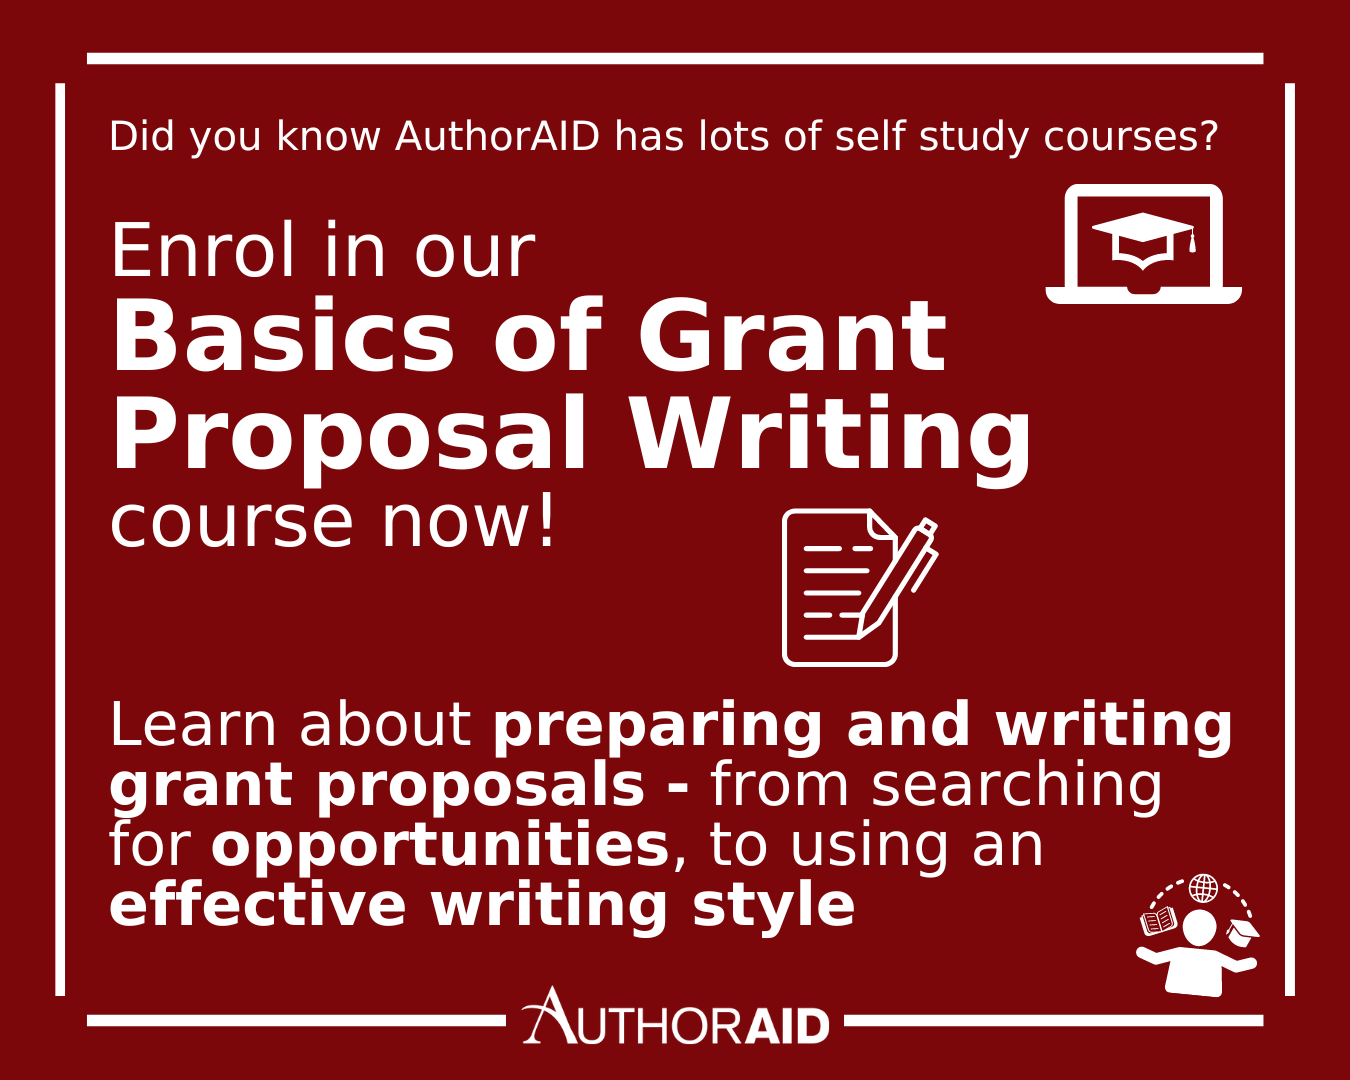 AuthorAID graphic - red background and all text in white. The AuthorAID logo is at the bottom, and a white straight border surrounds all the text. The text reads "Did you know AuthorAID has lots of self-study courses? Enrol in our Basics of Grant Proposal Writing Course now! Learn about preparing and writing grant proposals - from searching for opportunities, to using an effective writing style